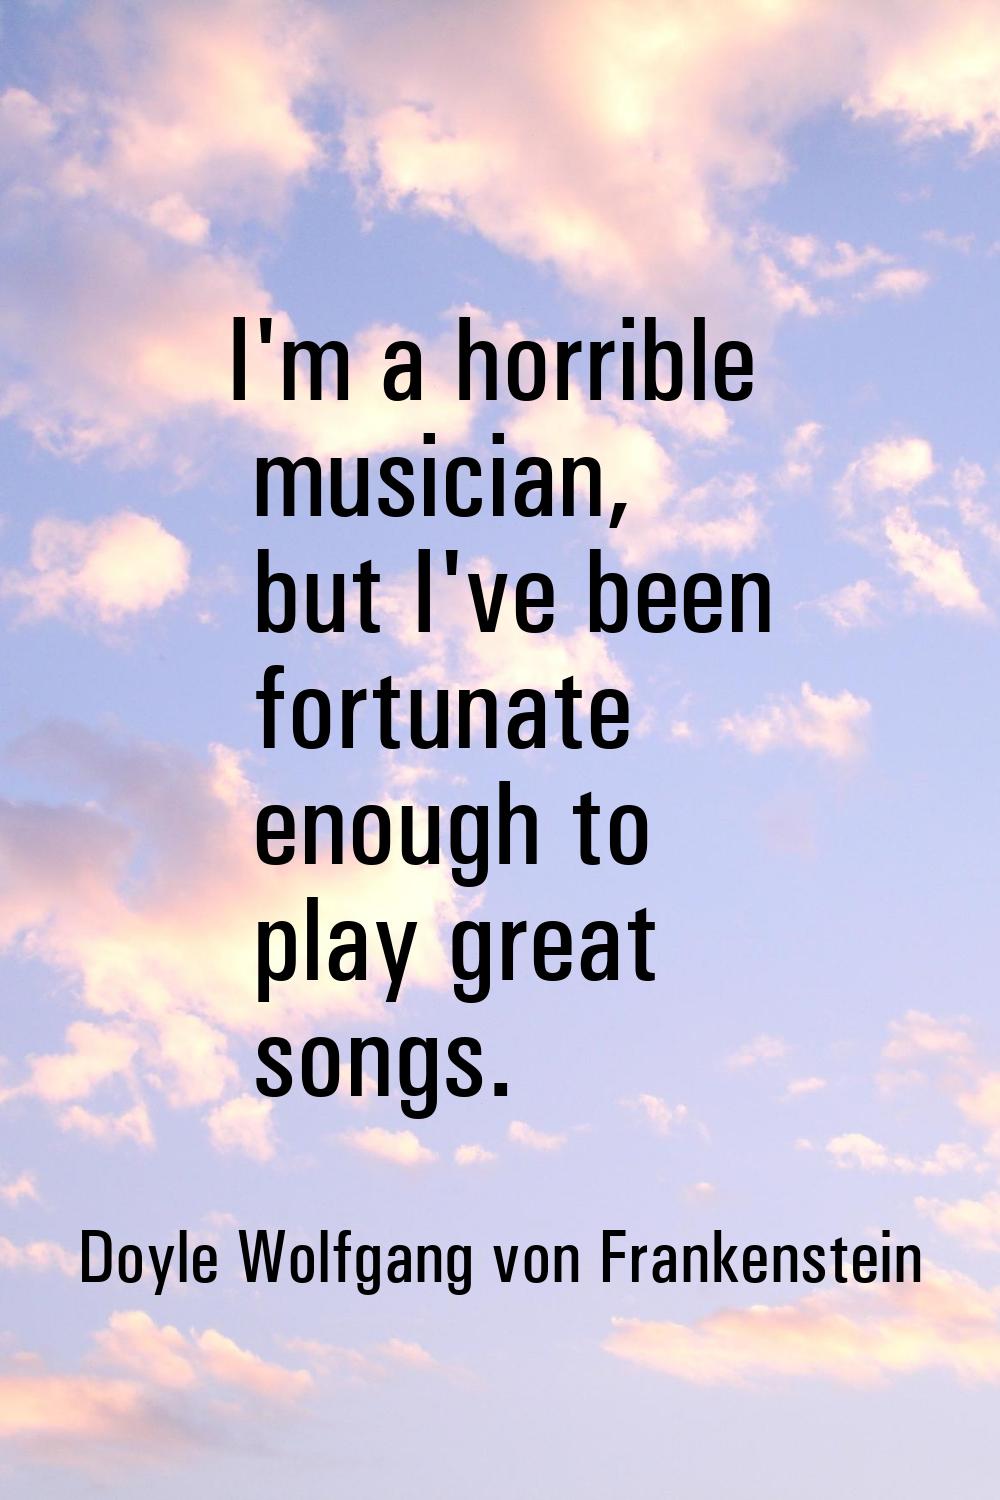 I'm a horrible musician, but I've been fortunate enough to play great songs.